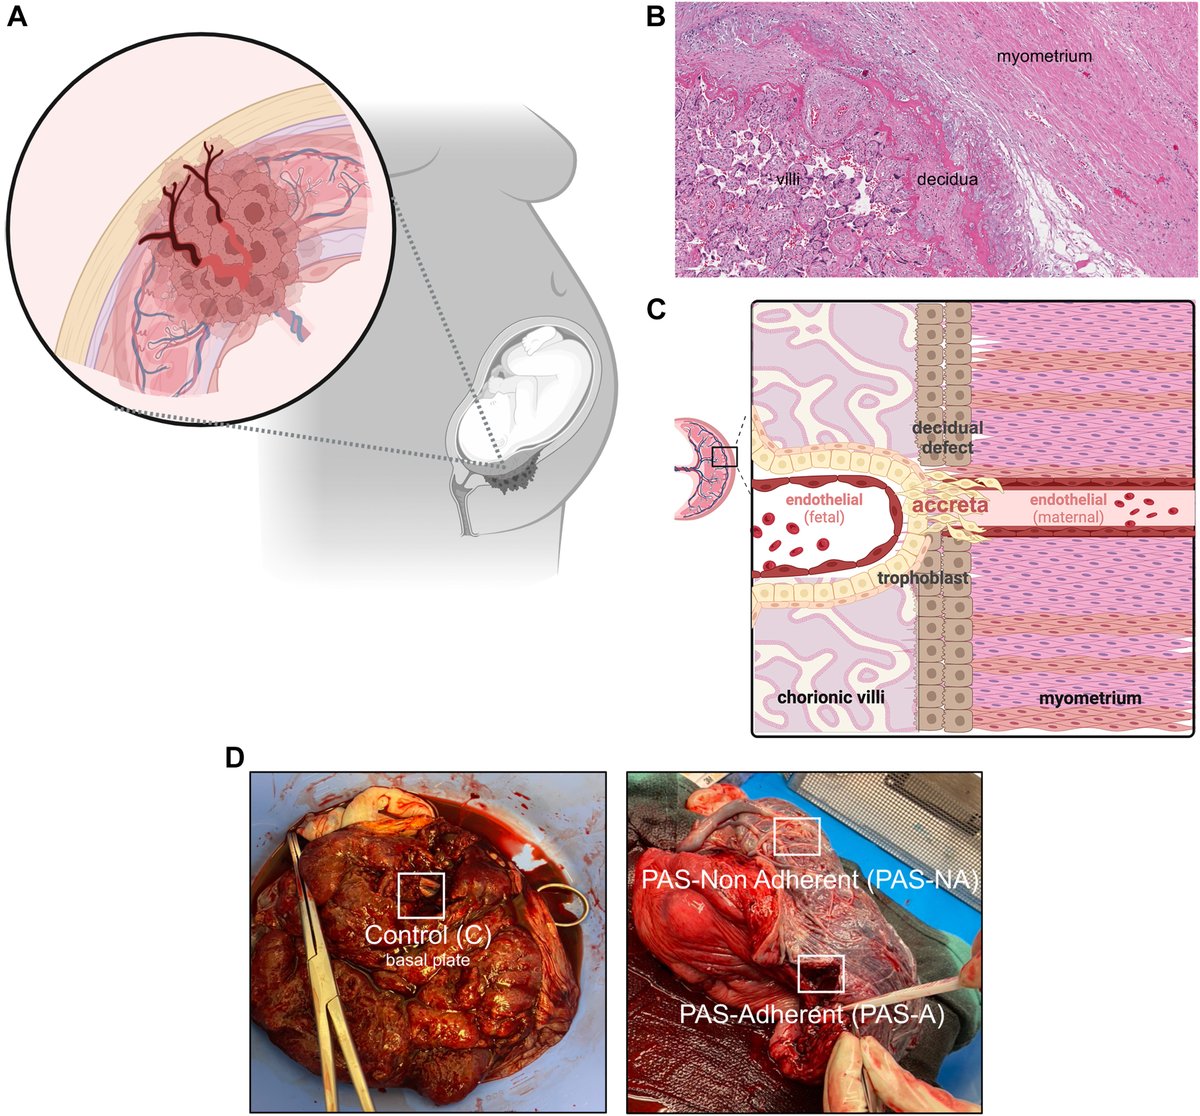 Placenta accreta spectrum disorder at single-cell resolution: a loss of boundary limits in the decidua and endothelium - Study design ow.ly/Hbbj50RgTxY